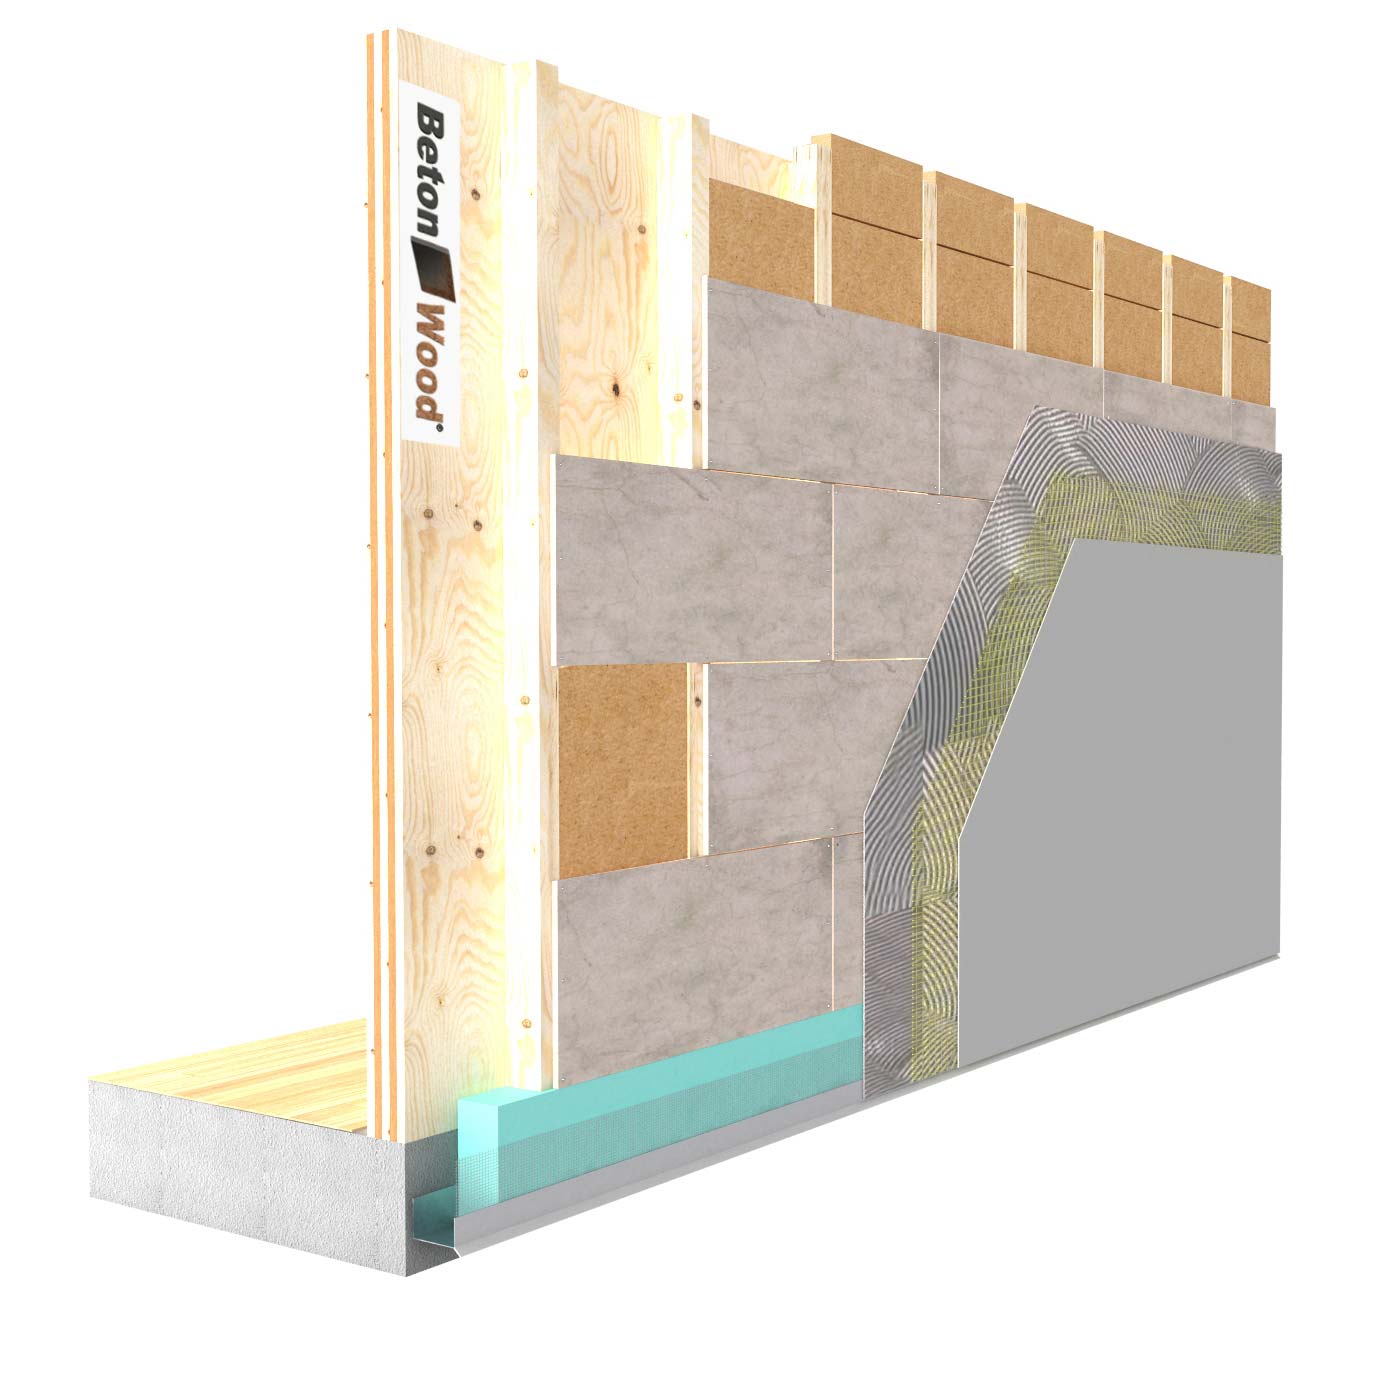 External insulation system with Therm dry wood fiber on wooden walls